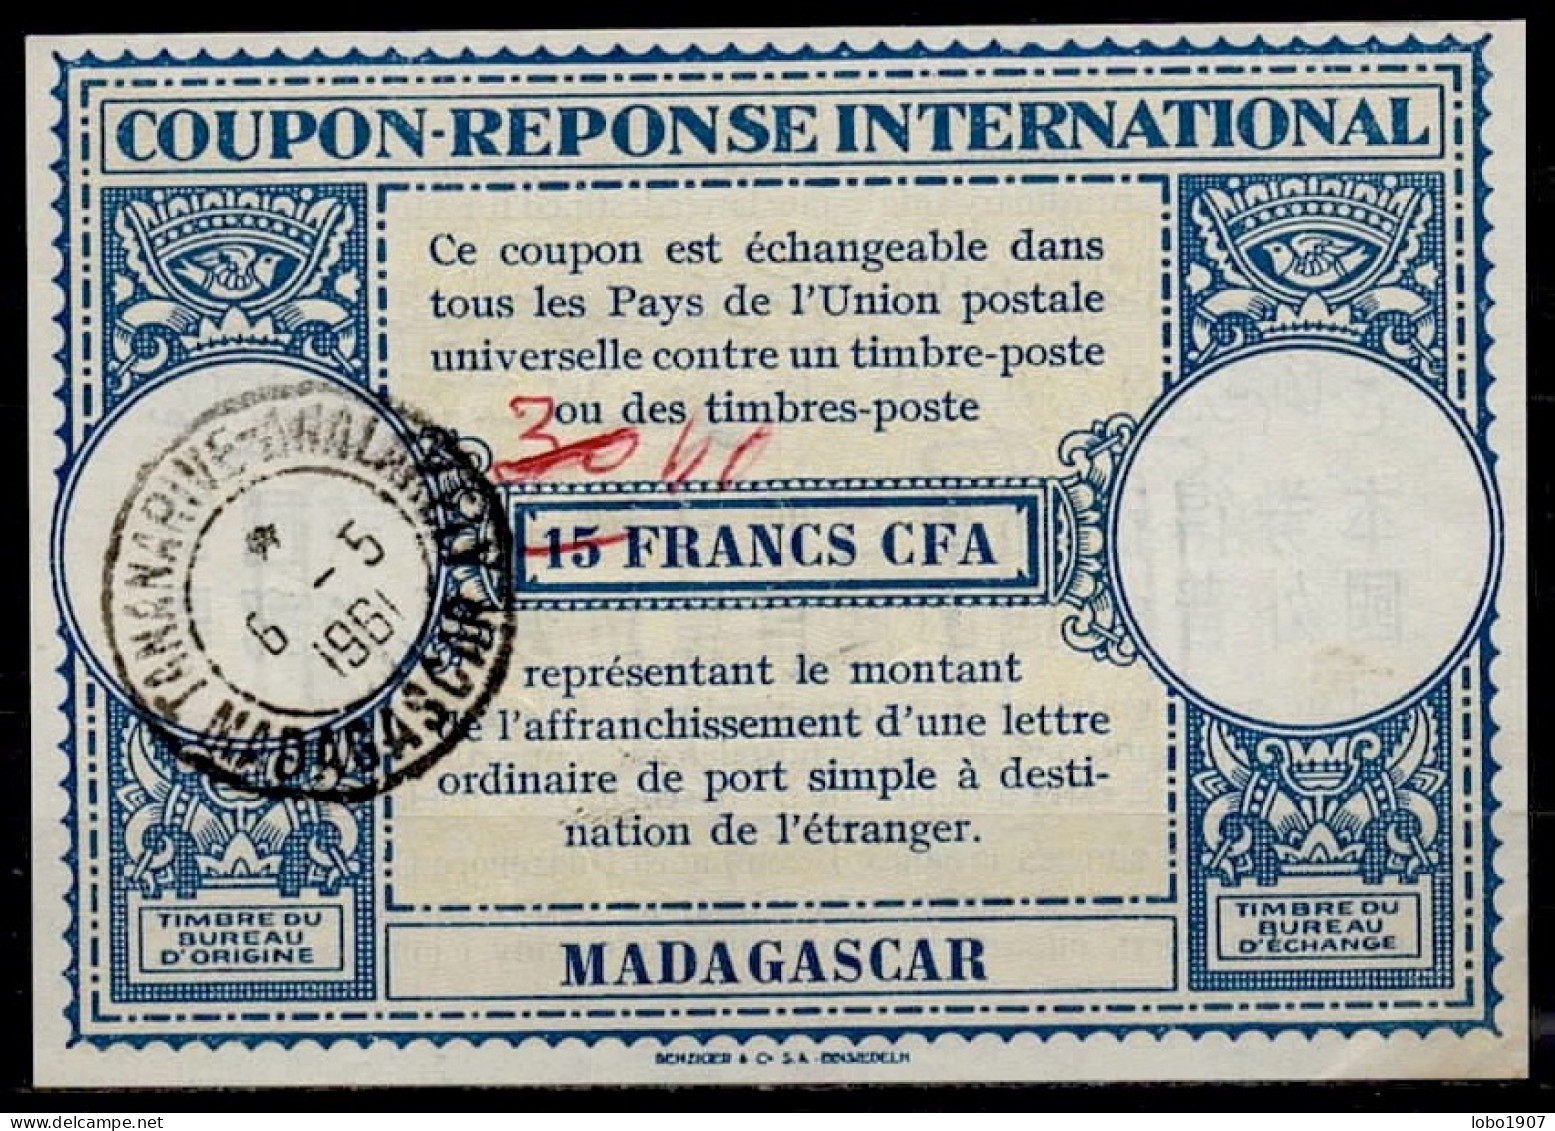 MADAGASCAR  Lo15  40 / 30 / 15 FRANCS CFA Int. Reply Coupon Reponse Antwortschein IRC IAS TANANARIVE ANALAKELY 06.05.61 - Lettres & Documents